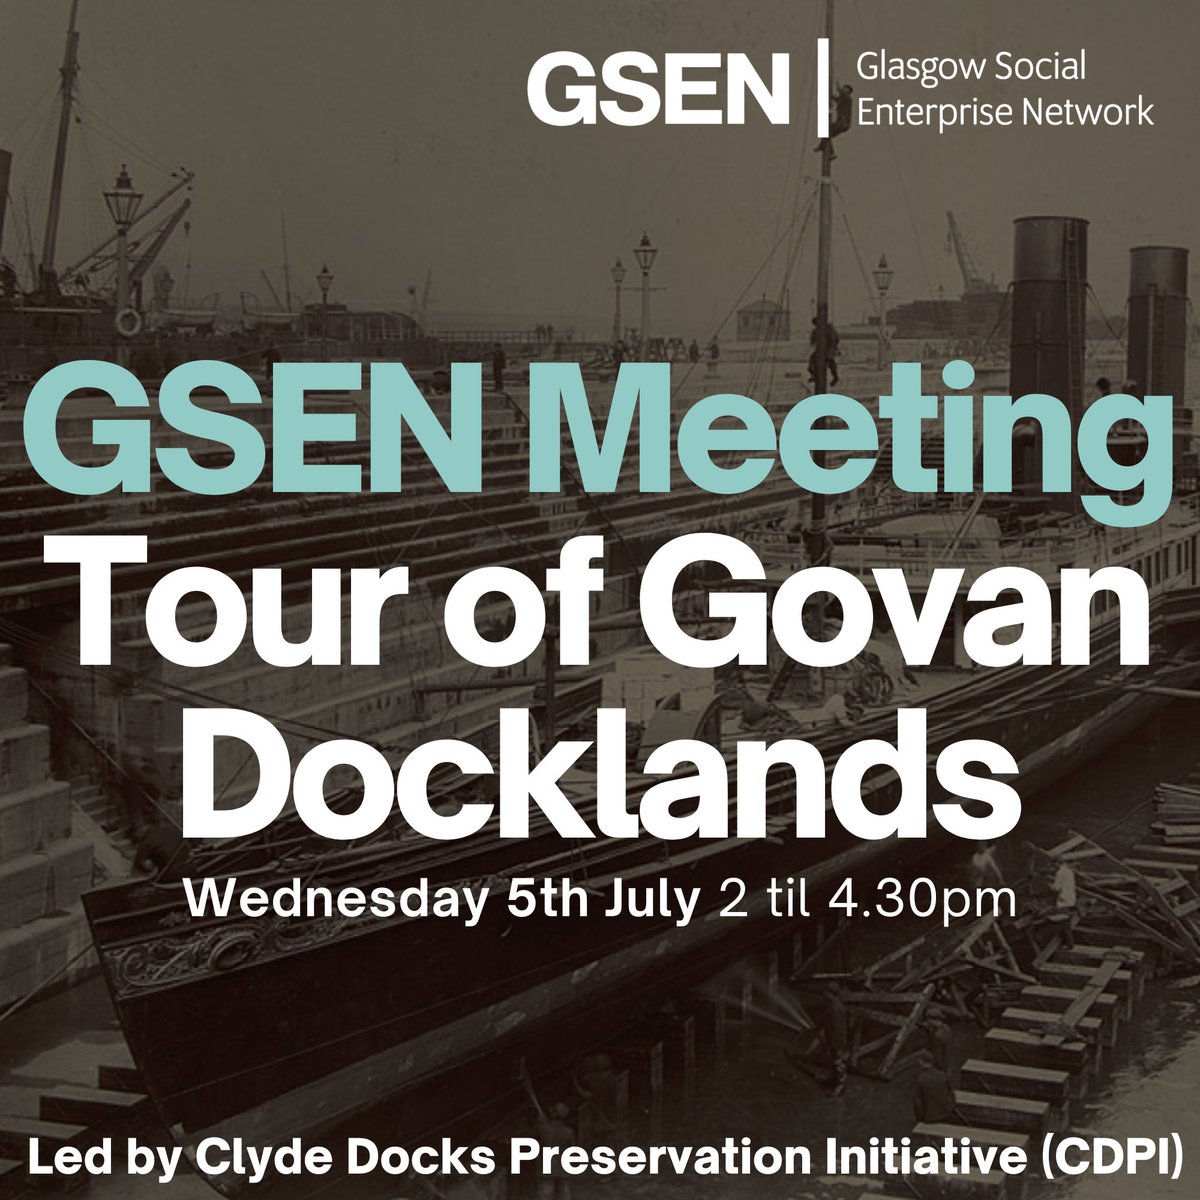 This month's GSEN meeting will be a bit different. We'll be learning more about the past, present and future of Govan's graving docks next week with @clydedocks This tour is free for GSEN members but please book a ticket if you'd like to join us: eventbrite.co.uk/e/645919902817